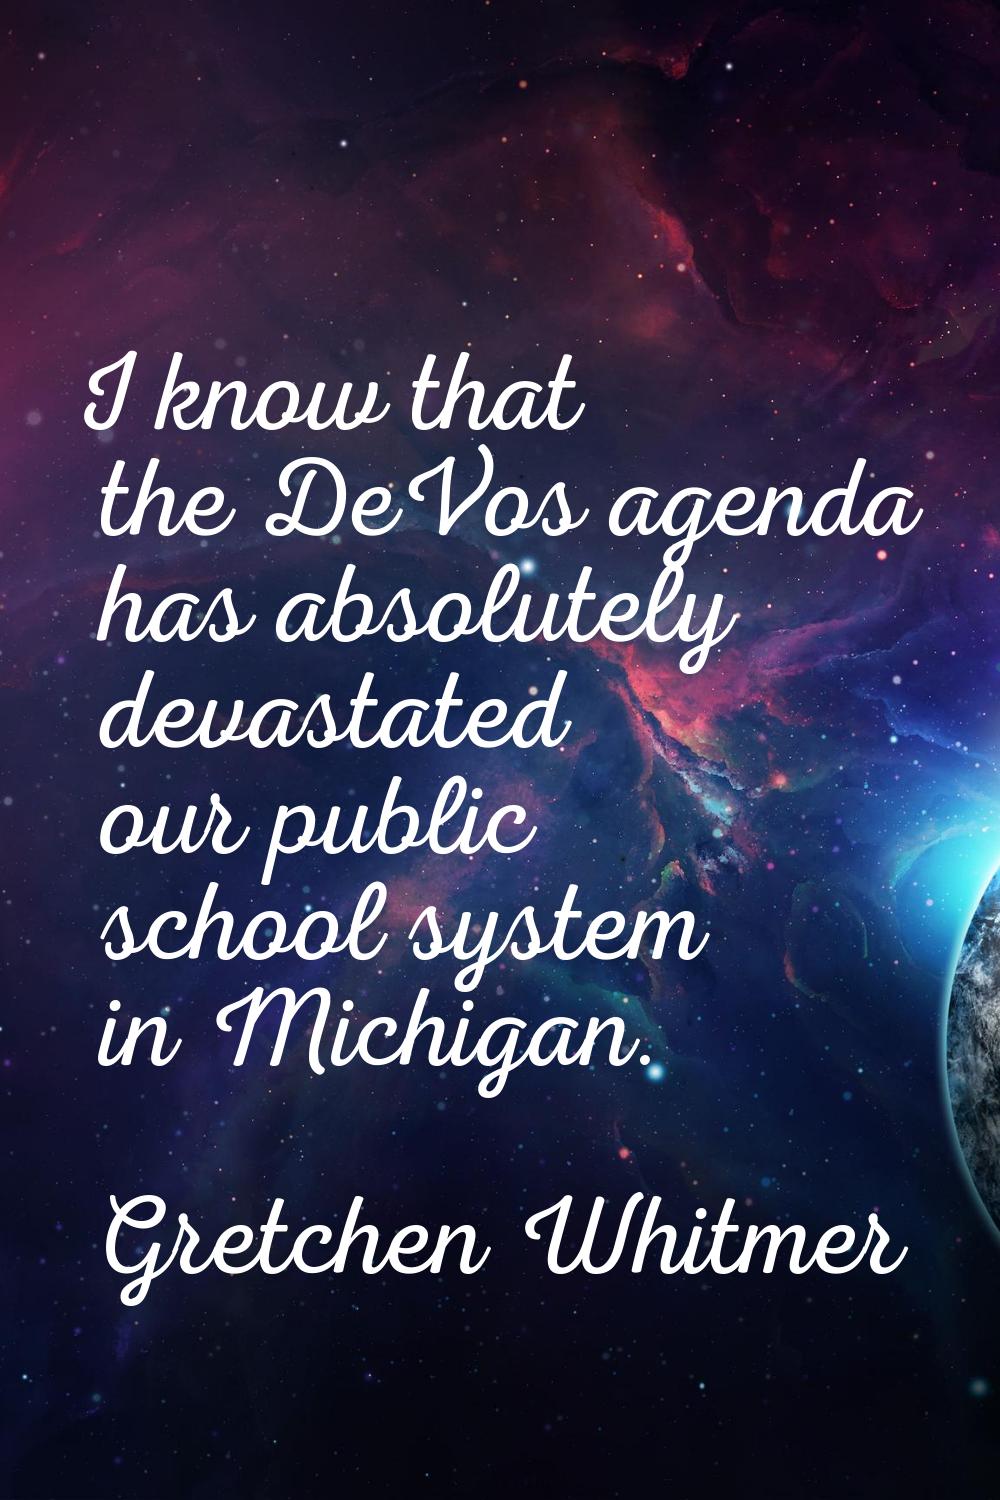 I know that the DeVos agenda has absolutely devastated our public school system in Michigan.